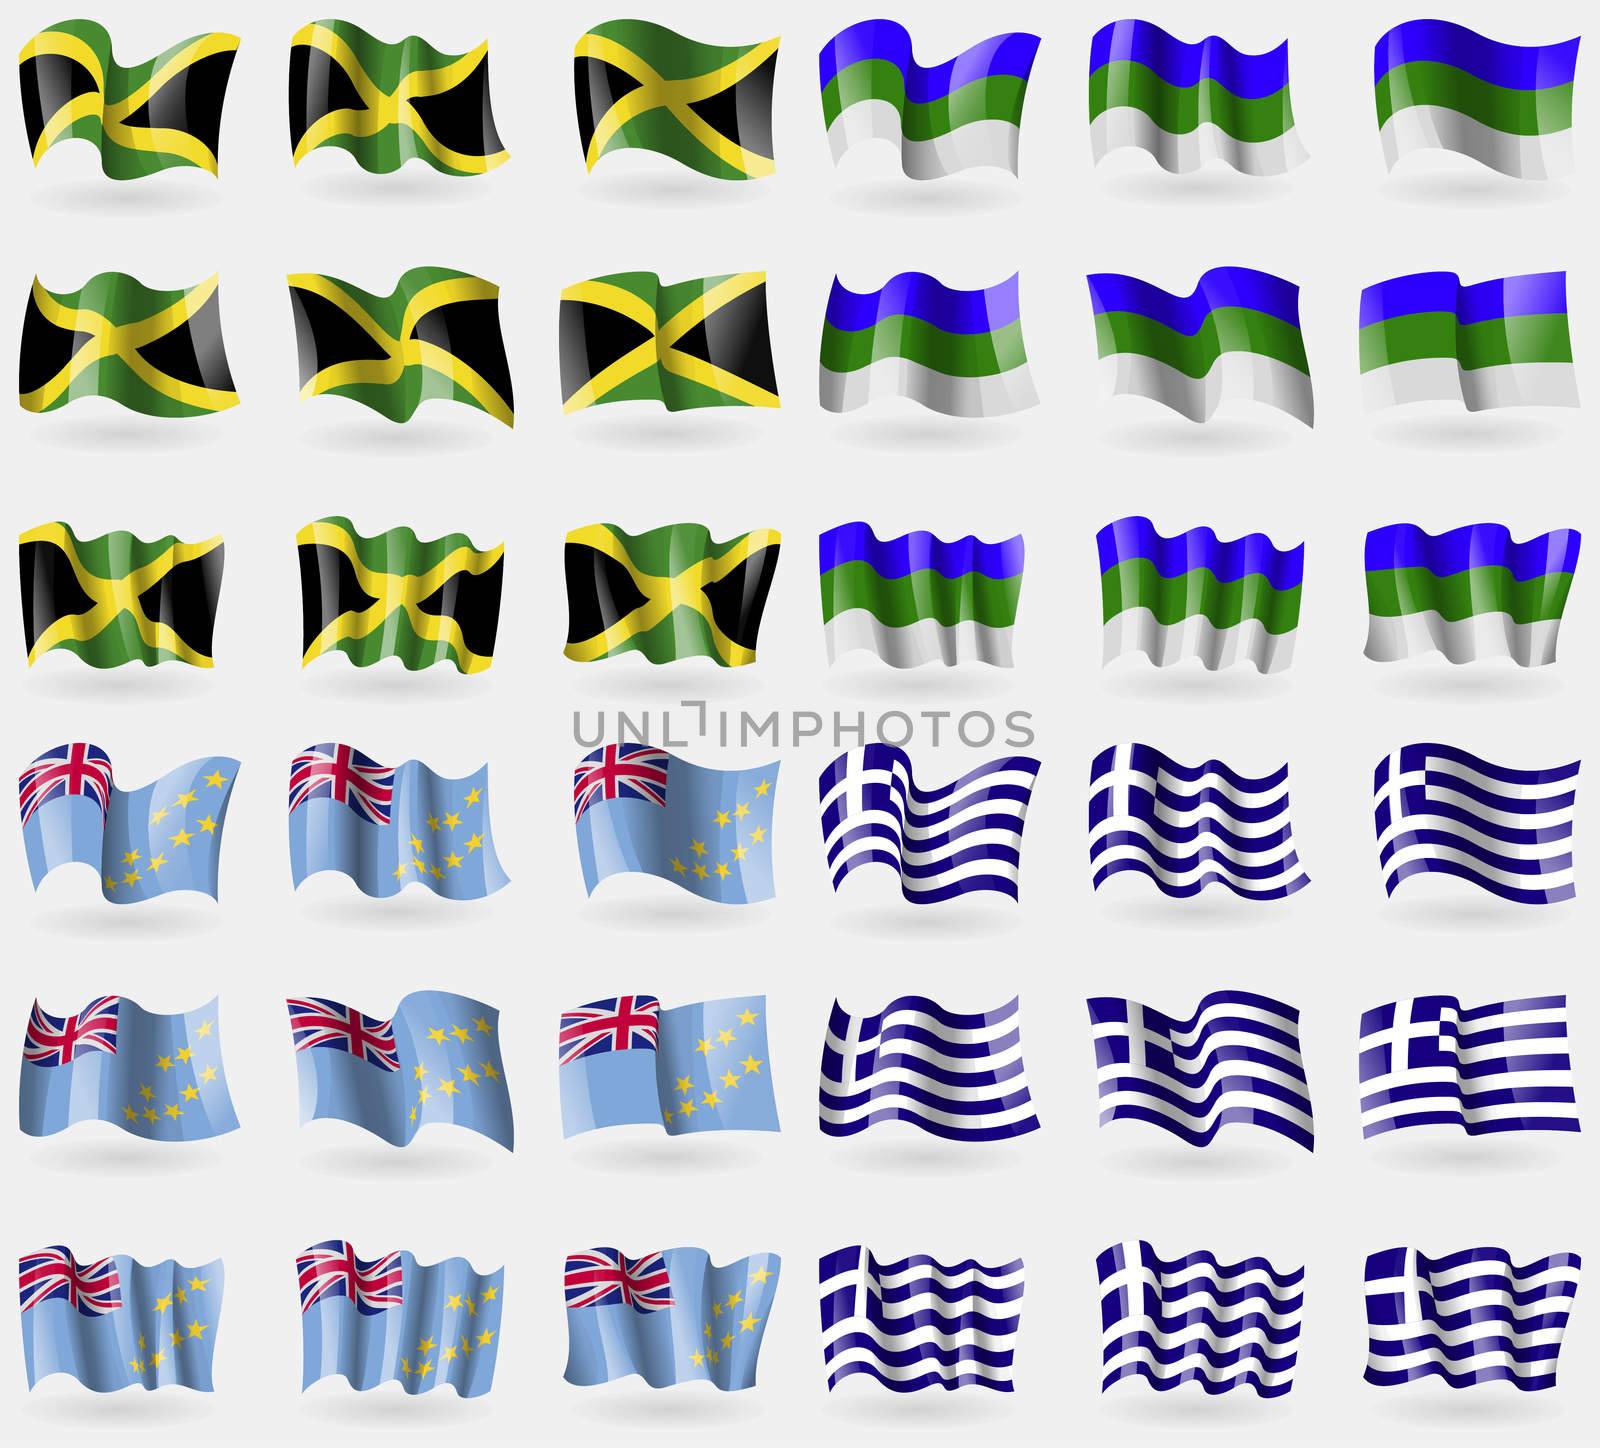 Jamaica, Komi, Tuvalu, Greece. Set of 36 flags of the countries of the world. illustration